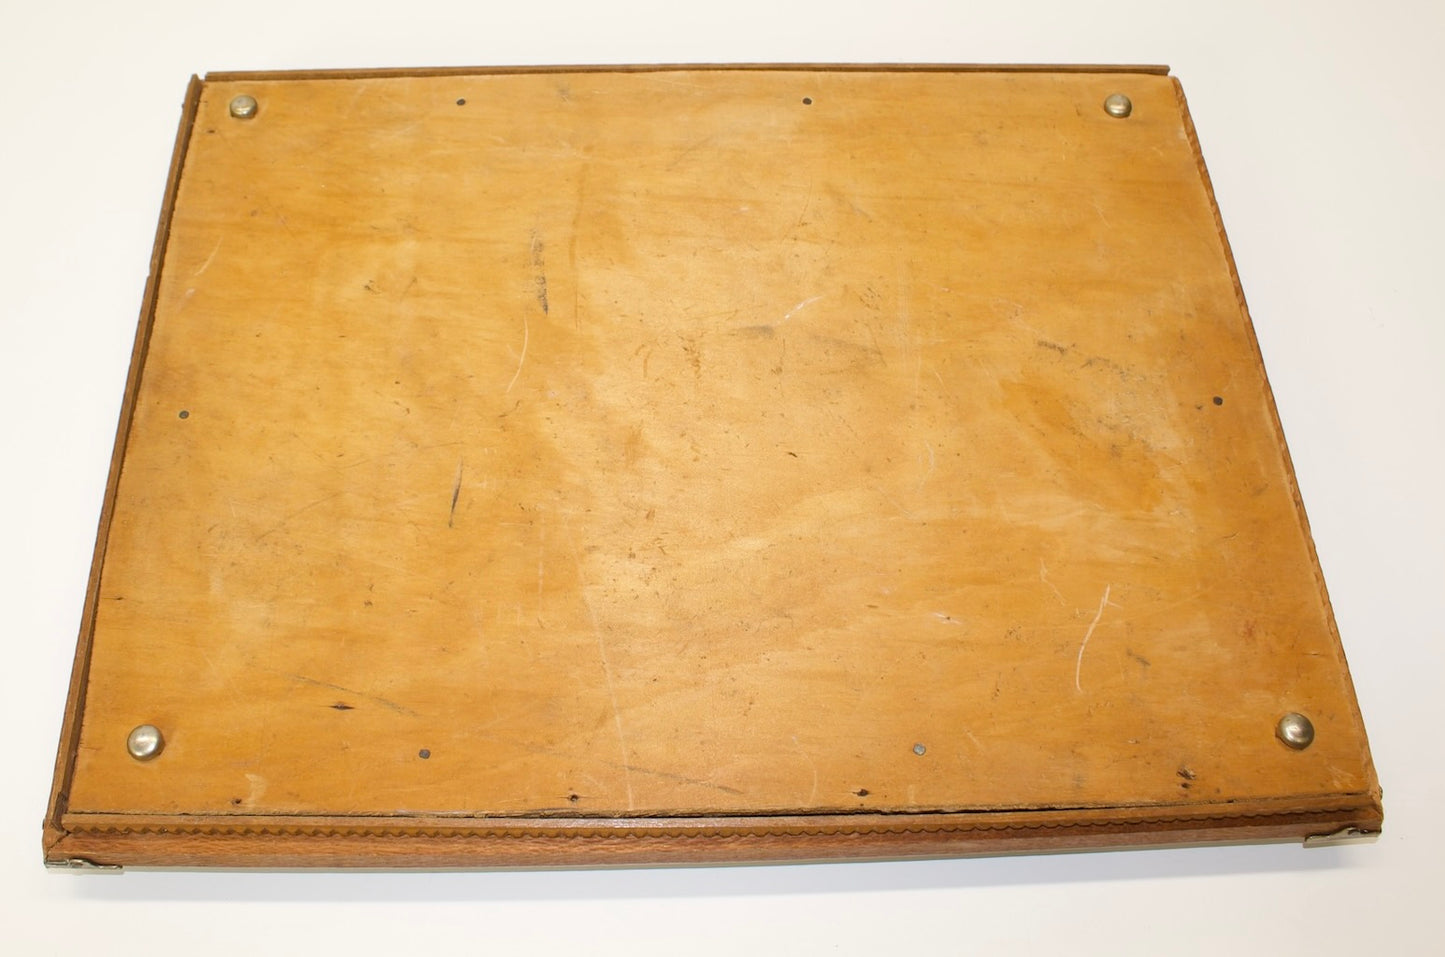 Vintage Serving Tray with an Inlay of the Country of Australian its animals back